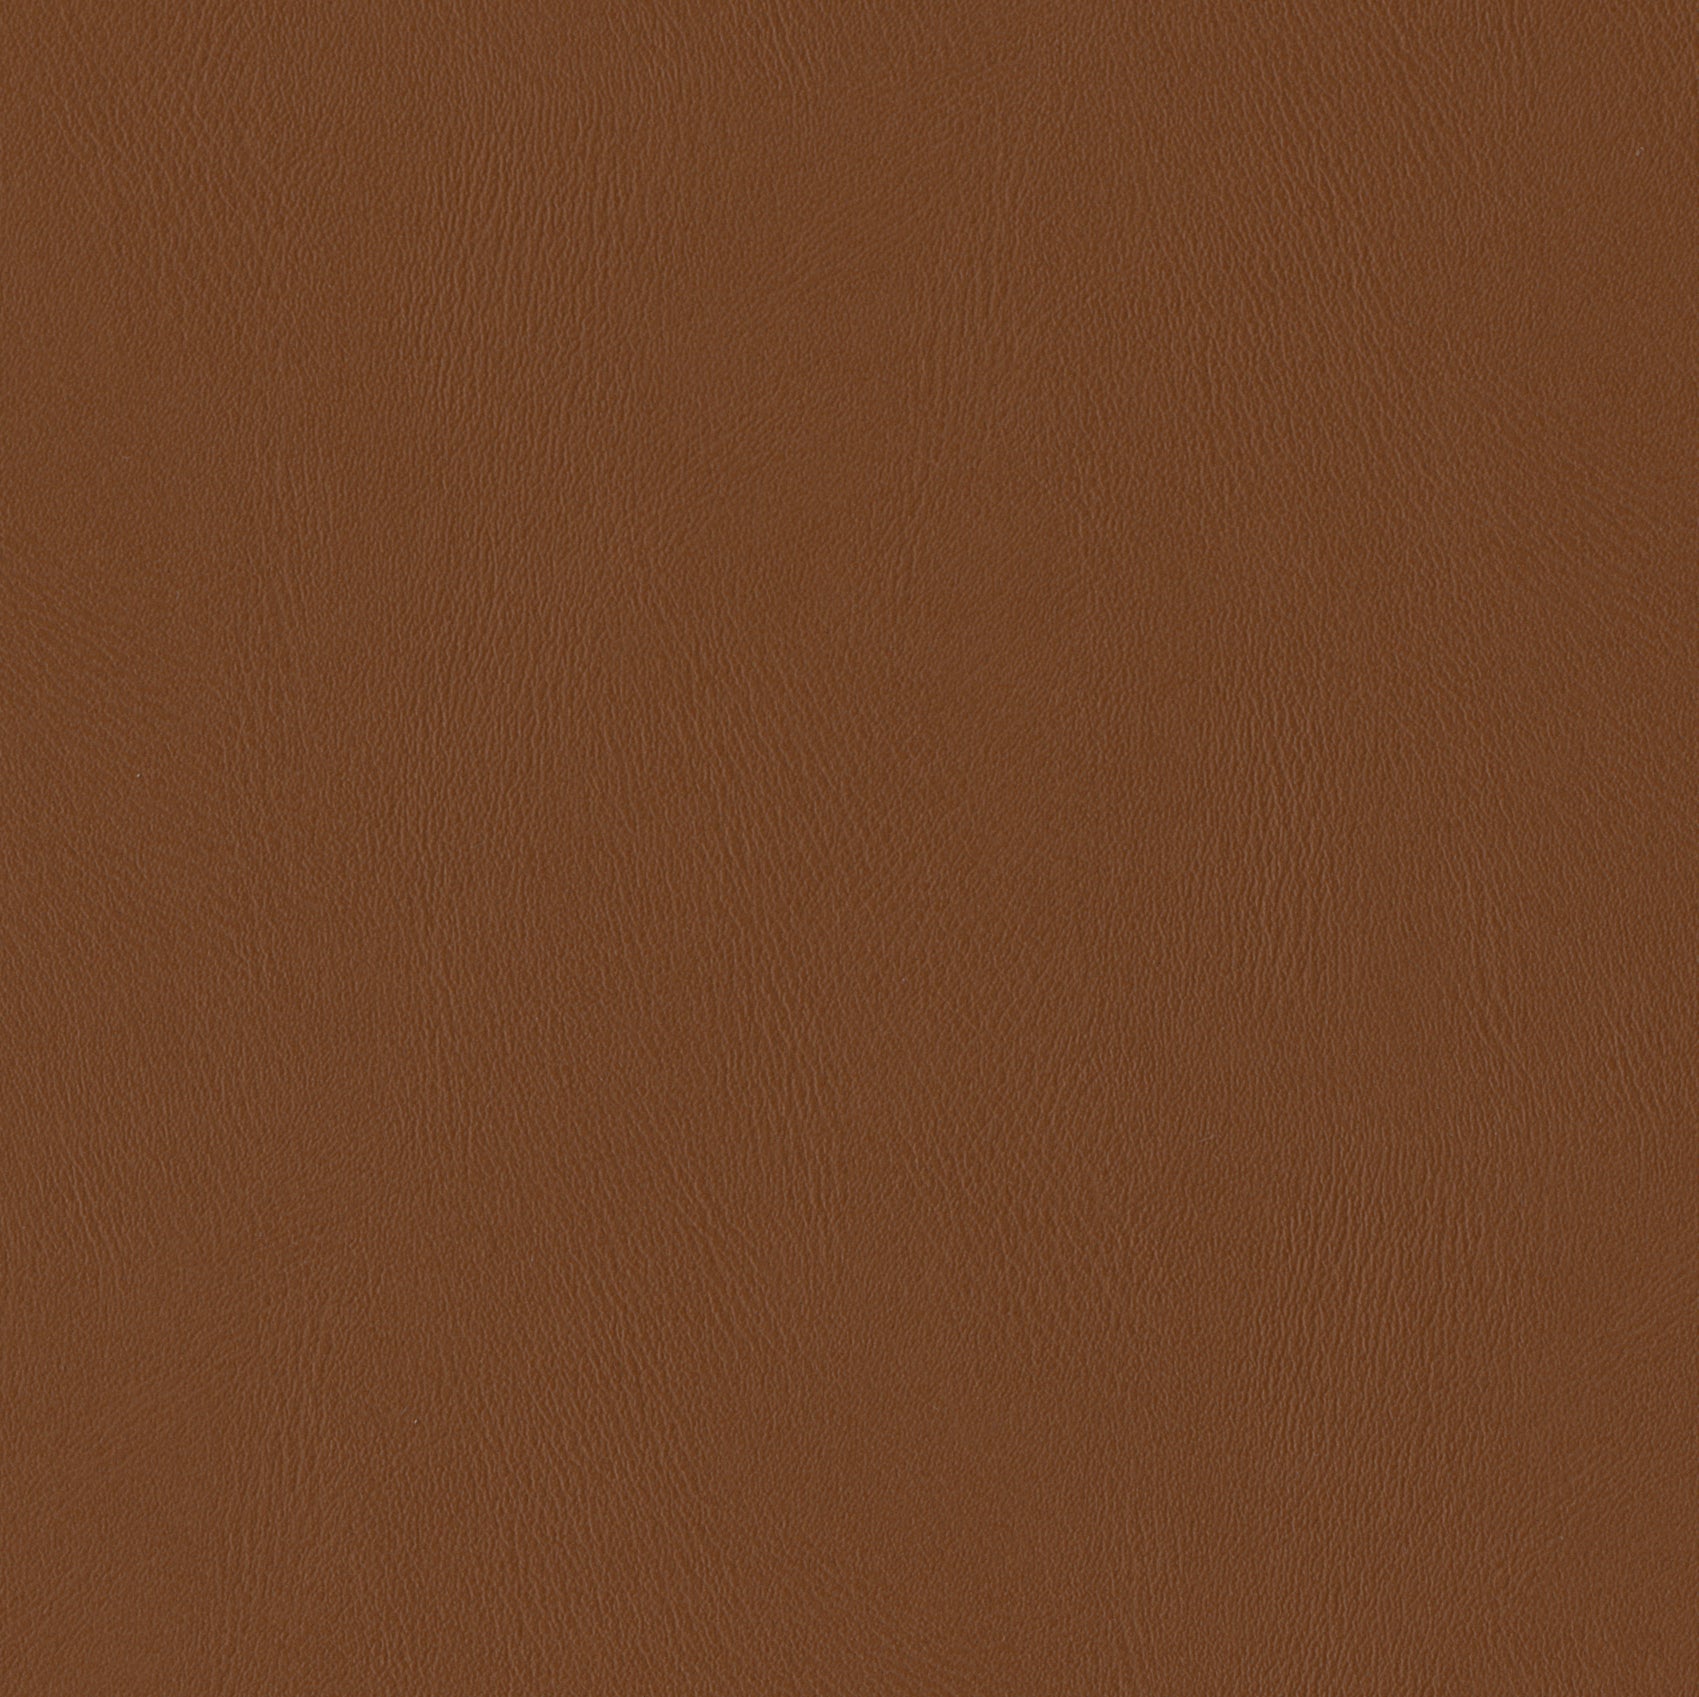       Andriali-Contract-Vinyl_Upholstery-Design-SoloFR5-Color-310GingerBread-Width-140cm